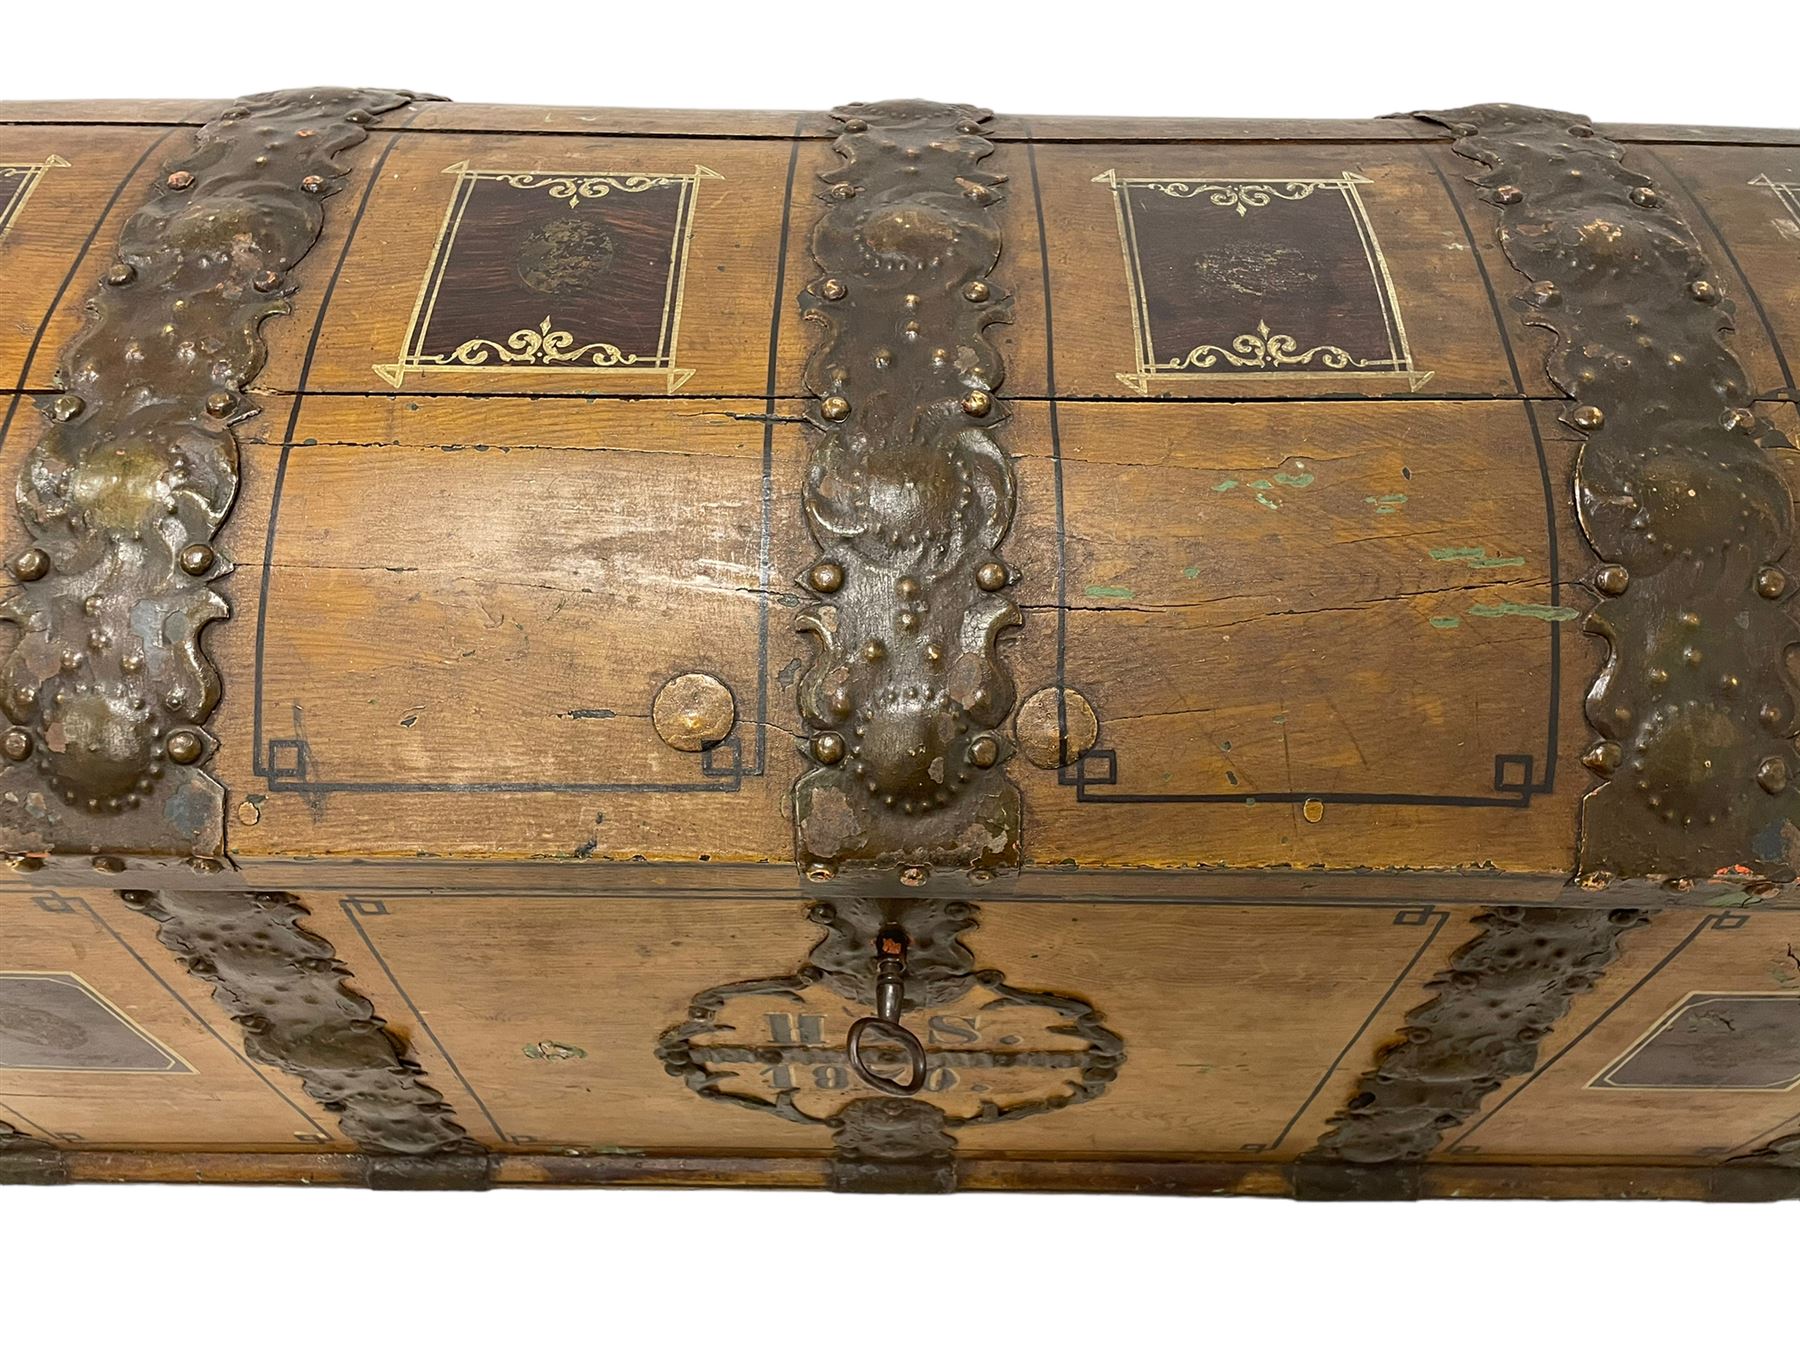 19th century Northern European painted oak sea chest - Image 24 of 29